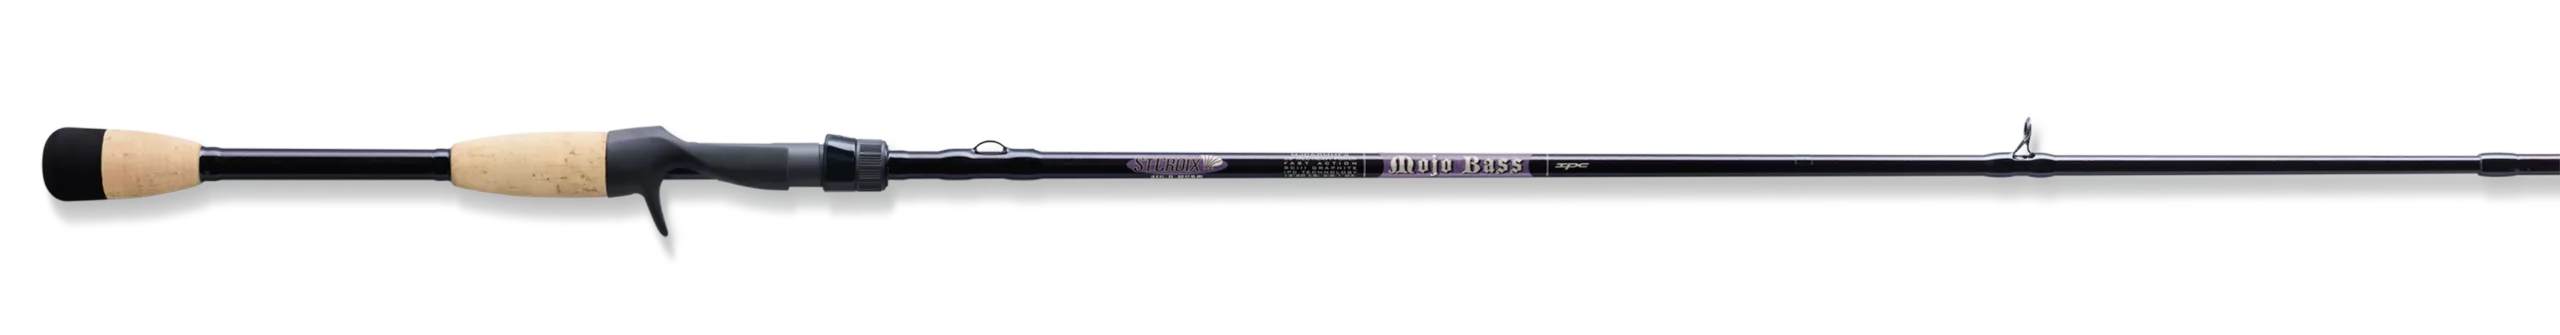 St. Croix Mojo Pike Casting Rod is an excellent choice for pike anglers who want a high-quality, versatile rod that can handle various fishing situations.